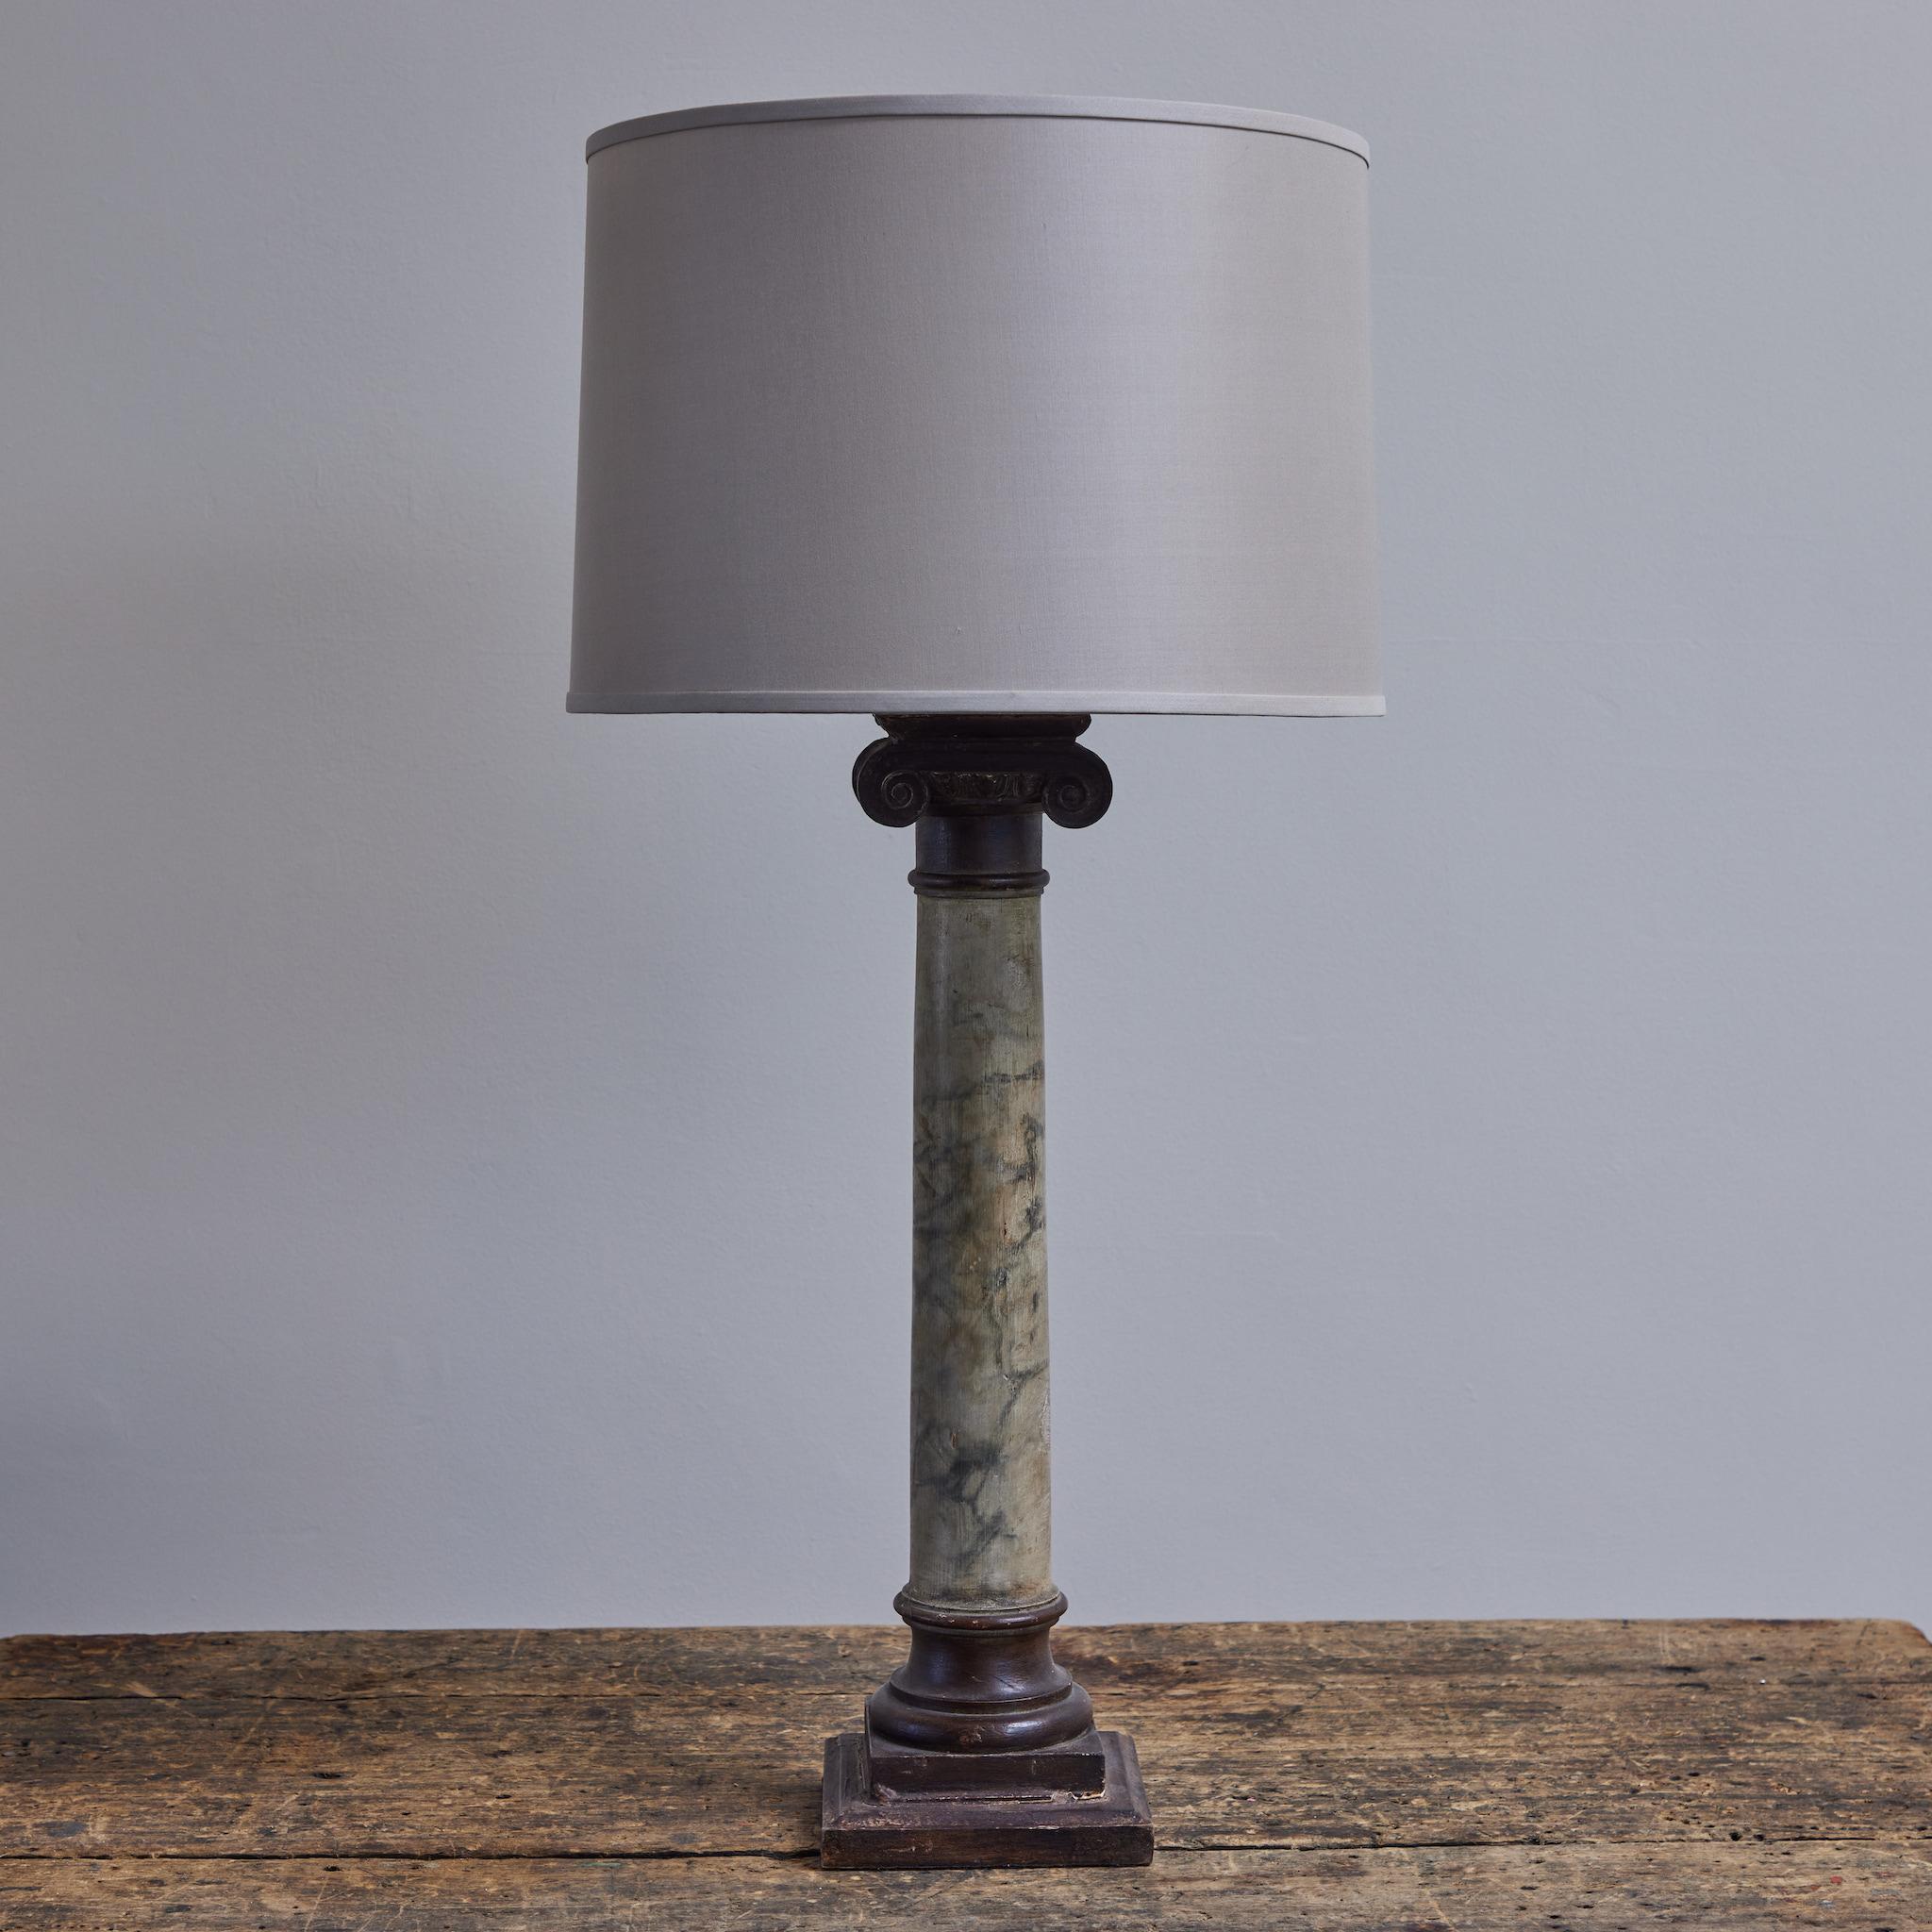 Beautiful late 19th-century English table lamp with custom cream linen drum shade and gray faux-marble hand-painted column base. The effect of the brushwork is an impressive trompe-l'oeil. Offset by the ionic-style capital and pedestal in a dark